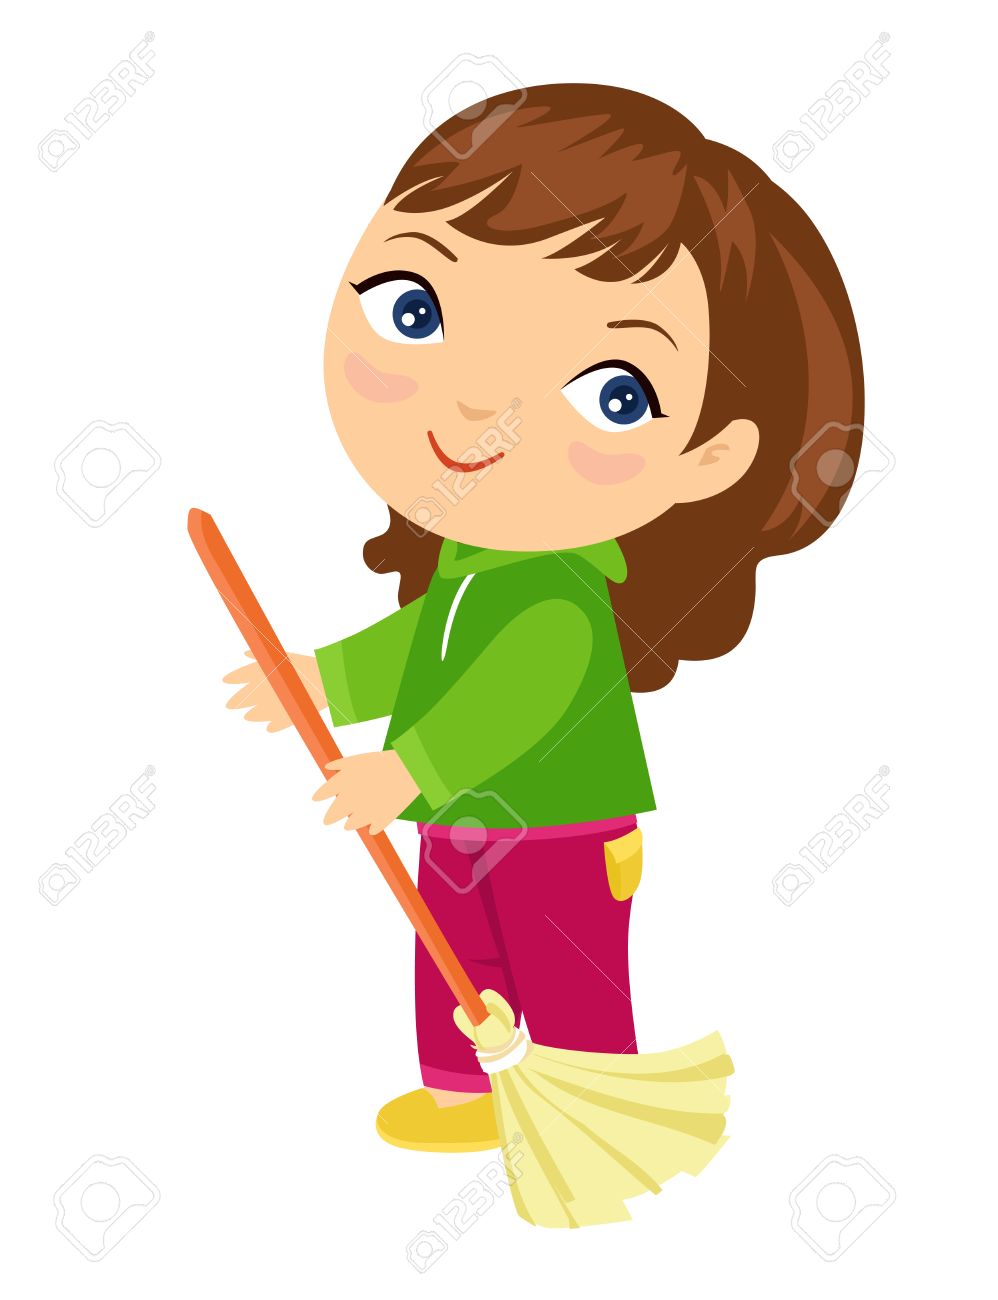 Child sweeping the floor clipart 1 » Clipart Station.